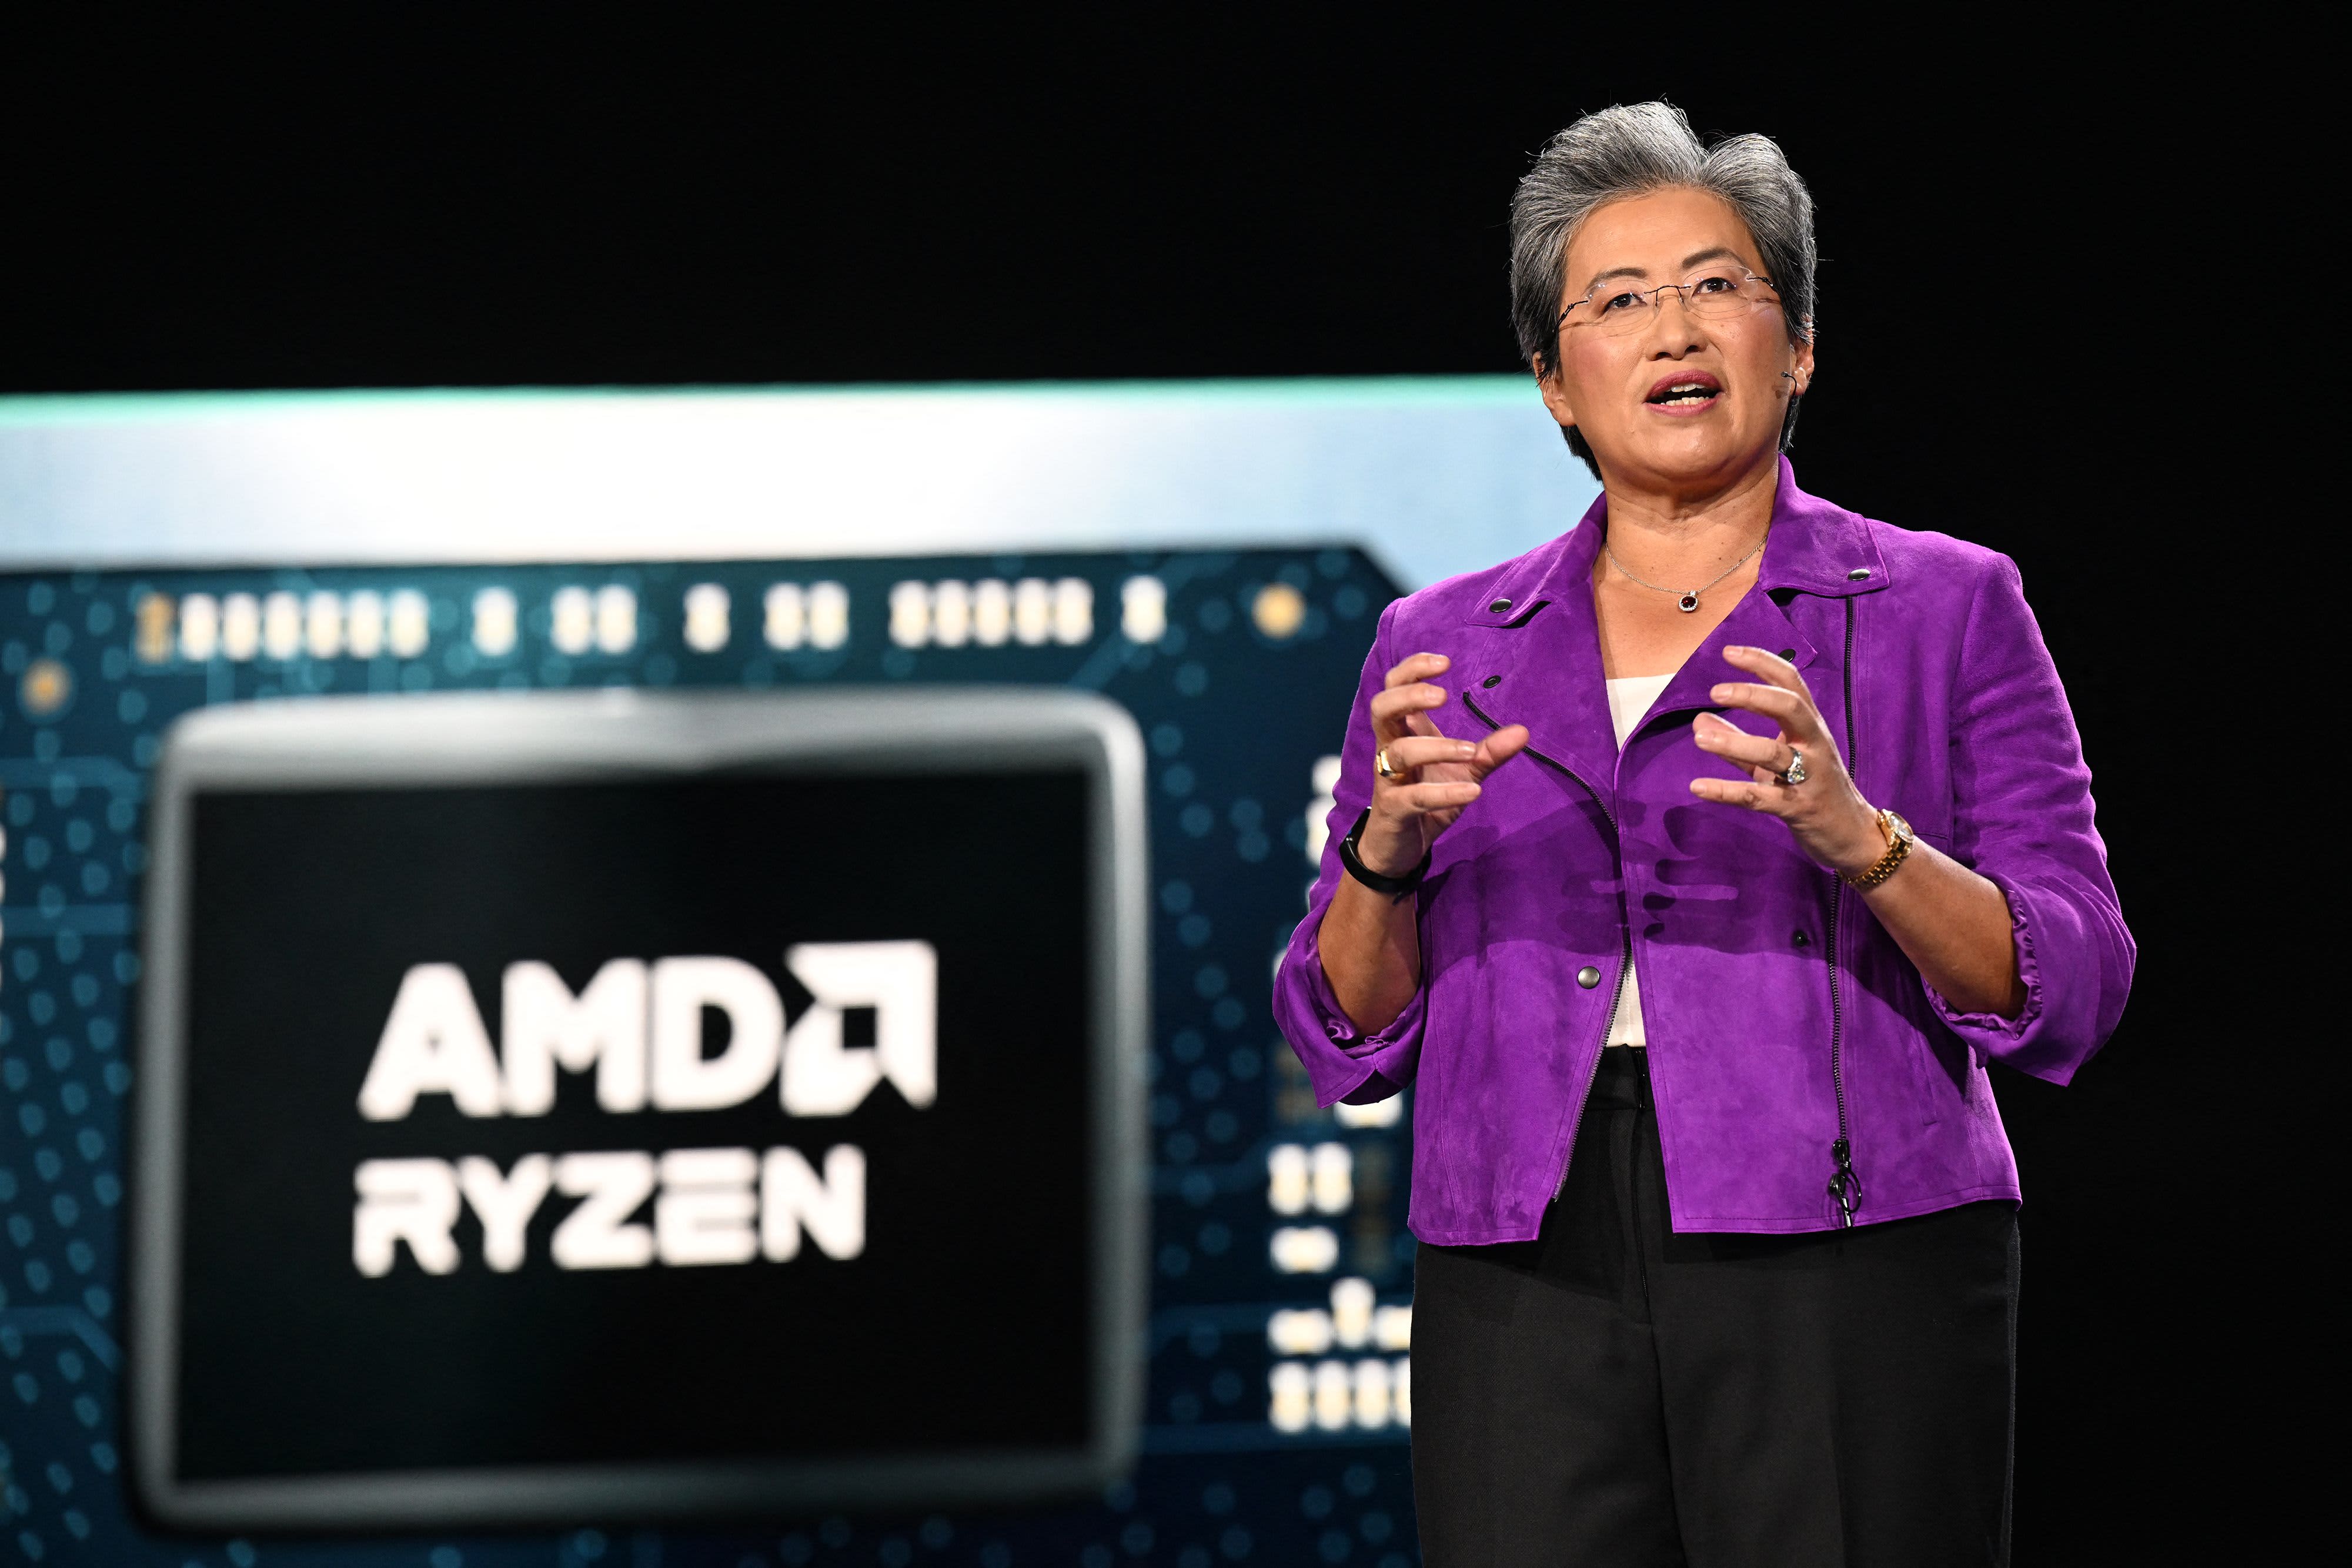 Wall Street analysts are conflicted on AMD after its earnings